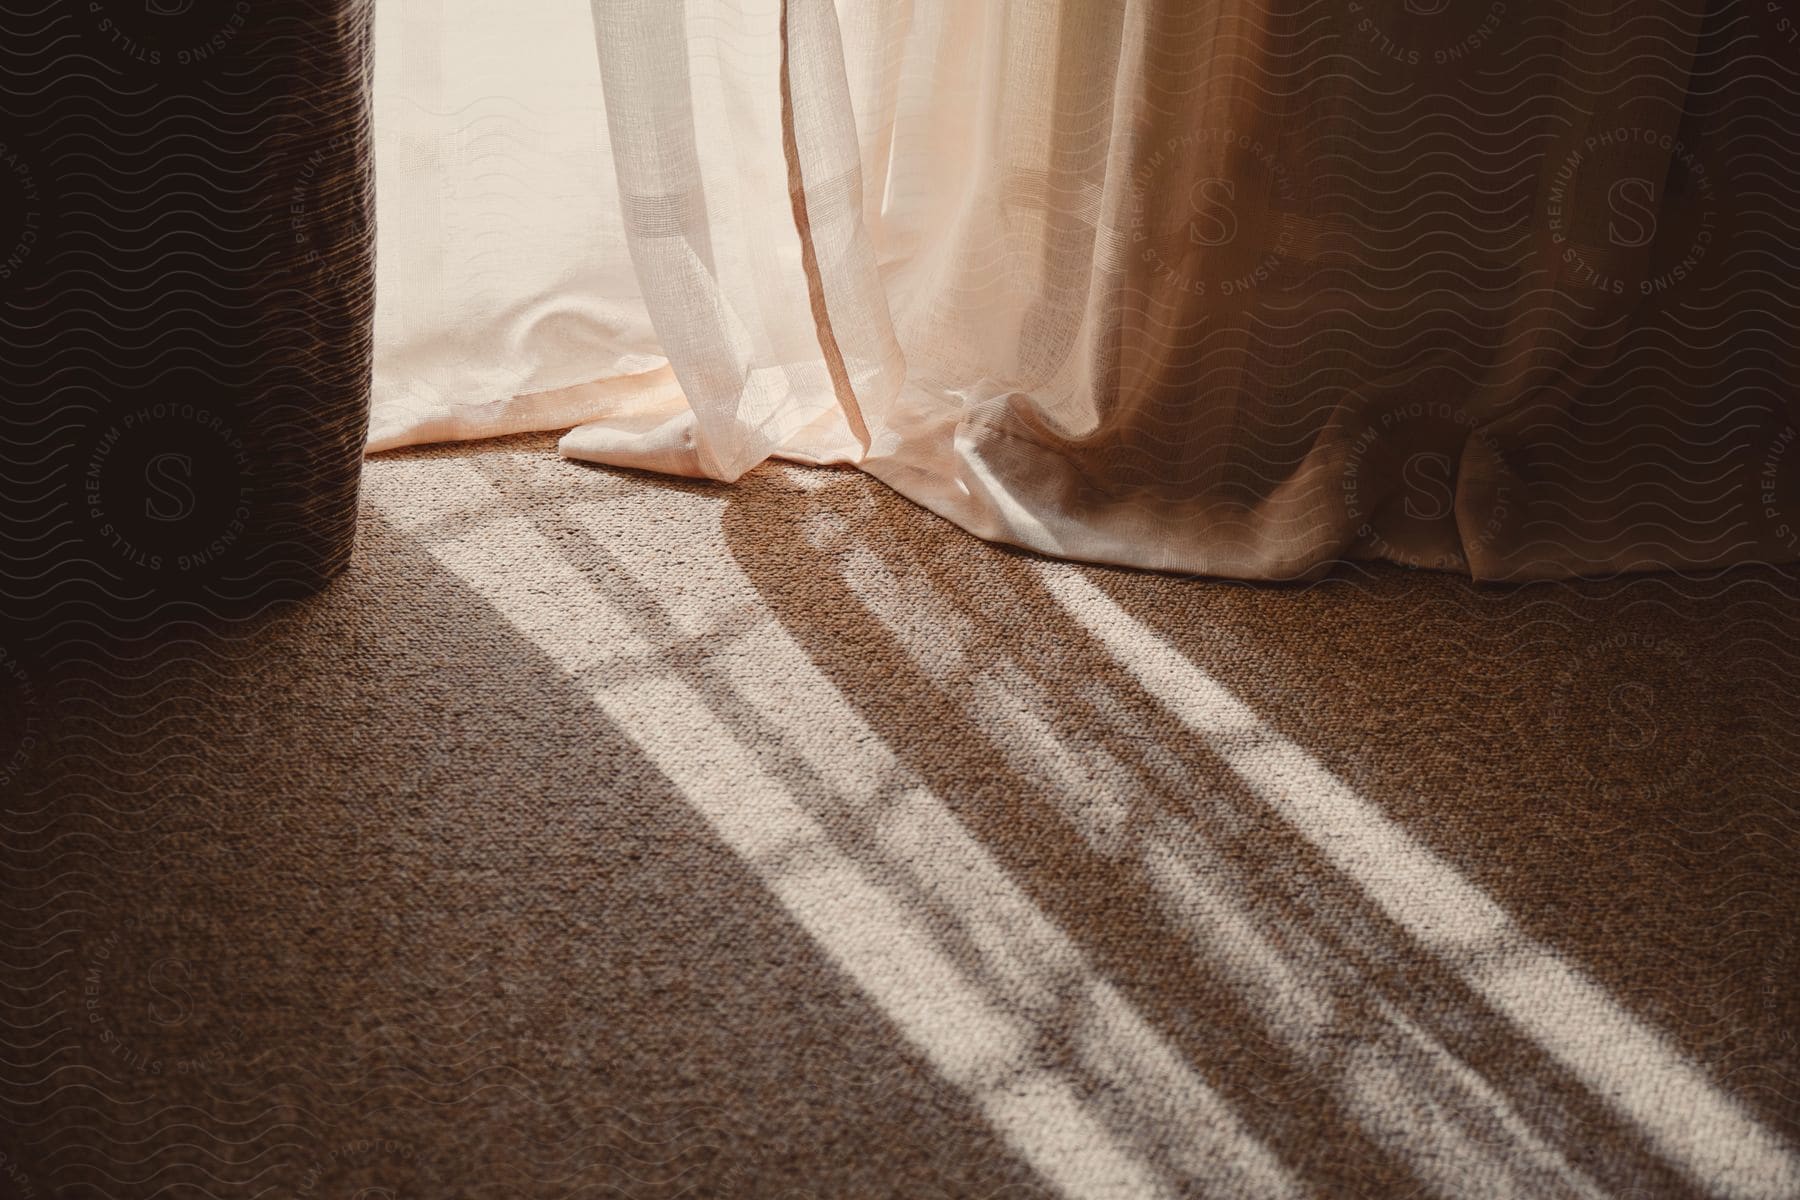 Daylight shines through a window casting light onto a carpeted floor